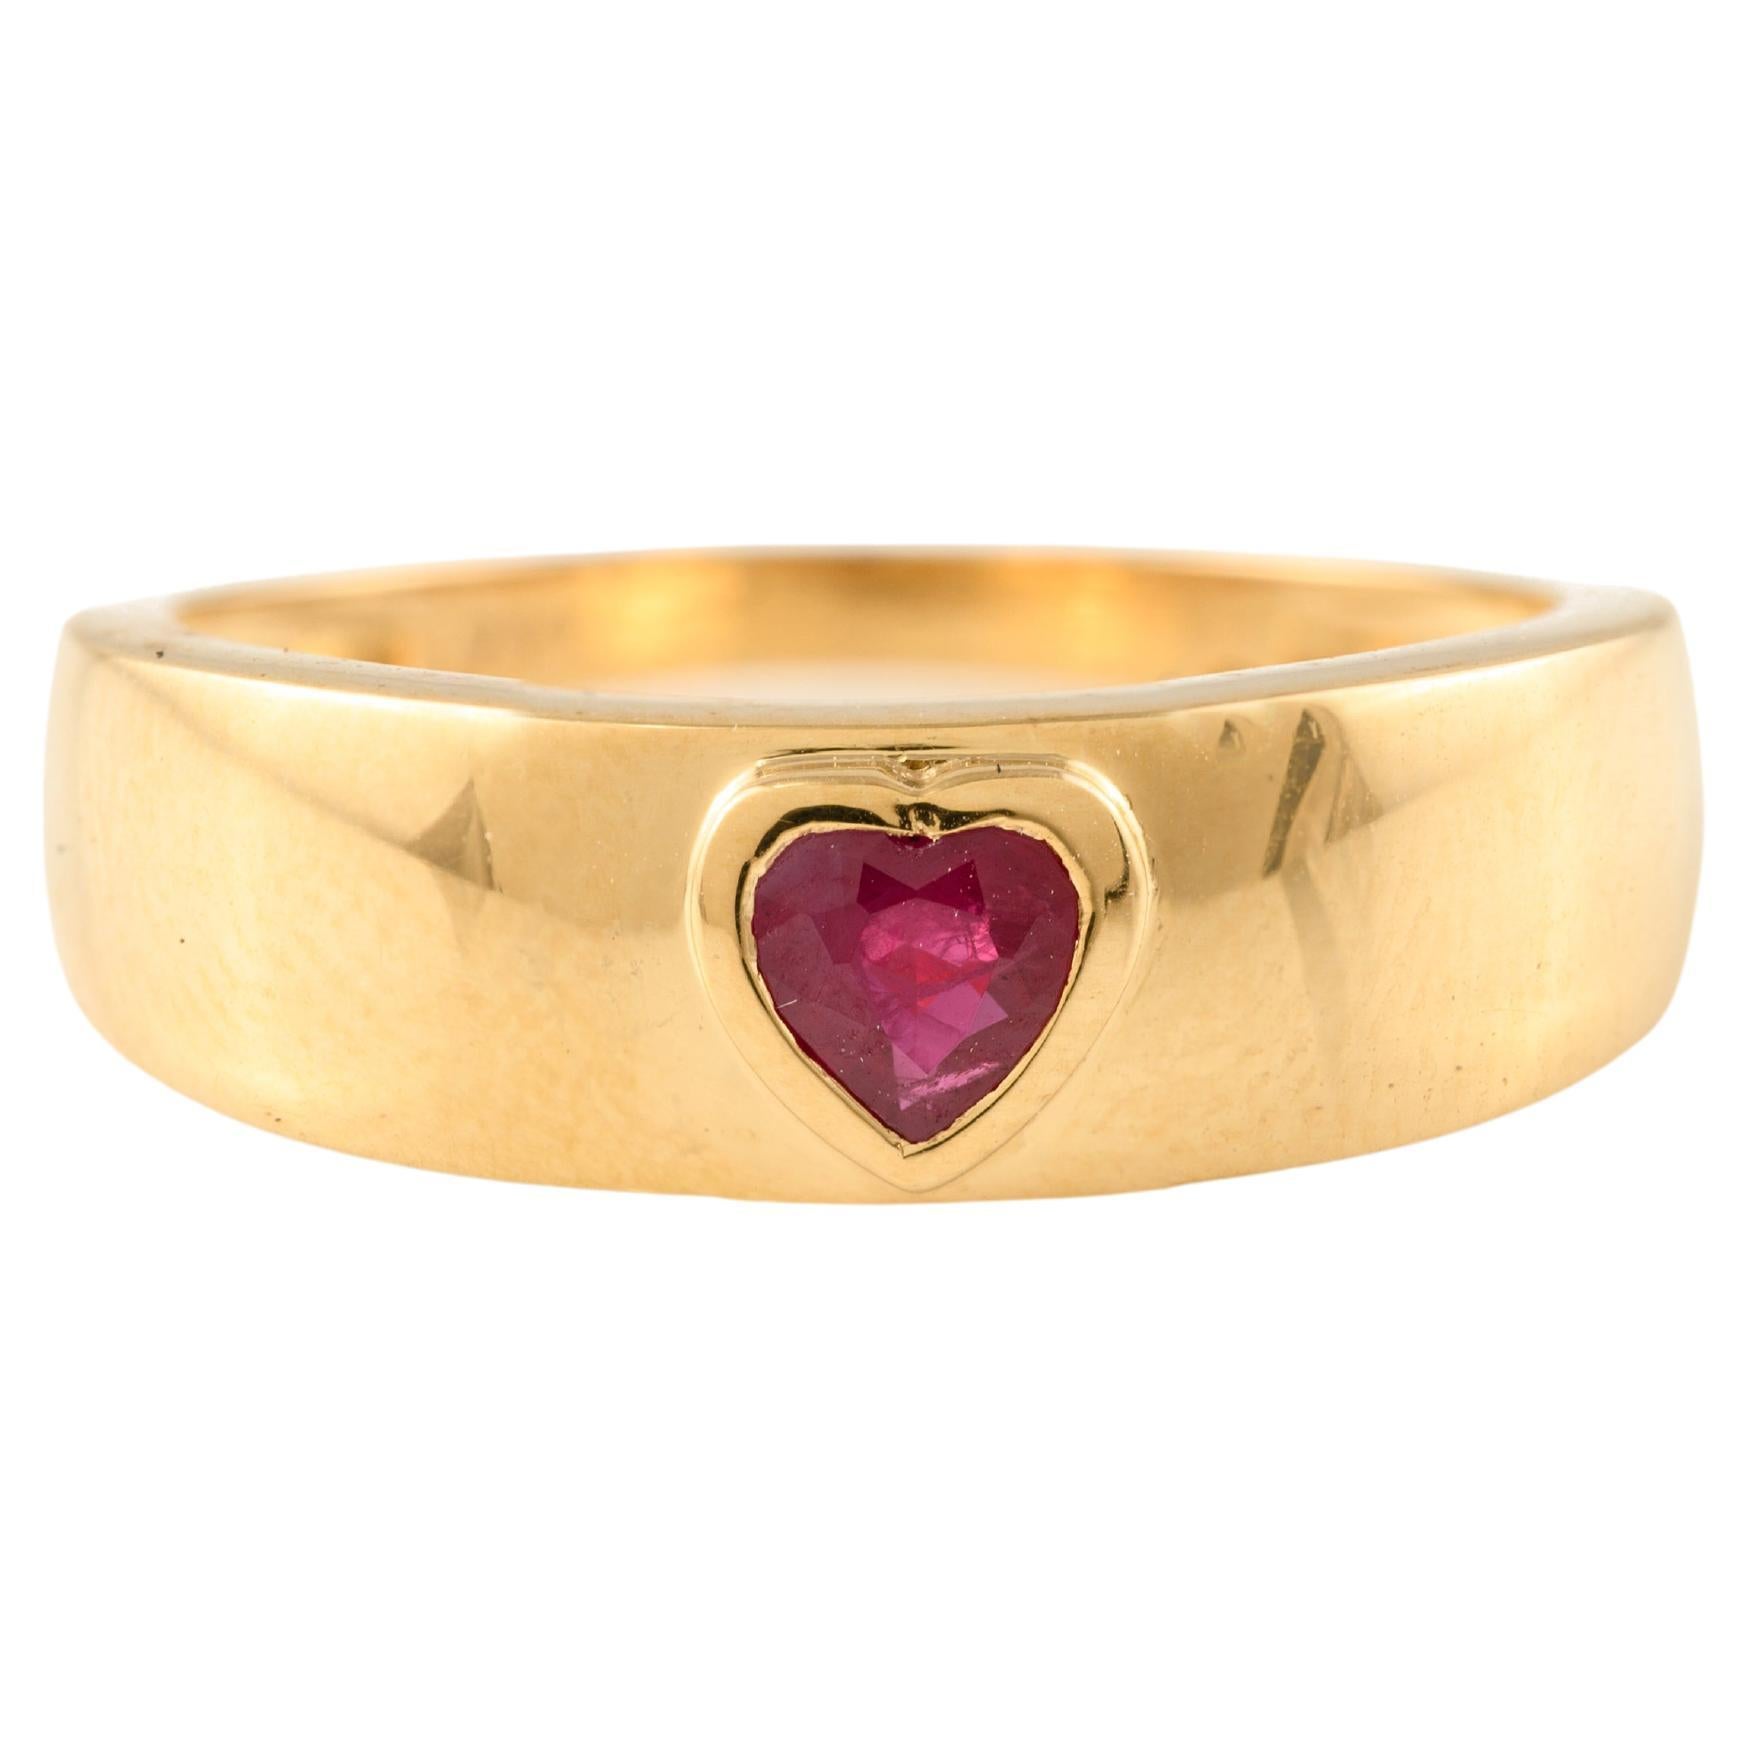 For Sale:  Dainty Heart Cut Ruby Mens Ring in 18k Solid Yellow Gold, Signet Ring for Her